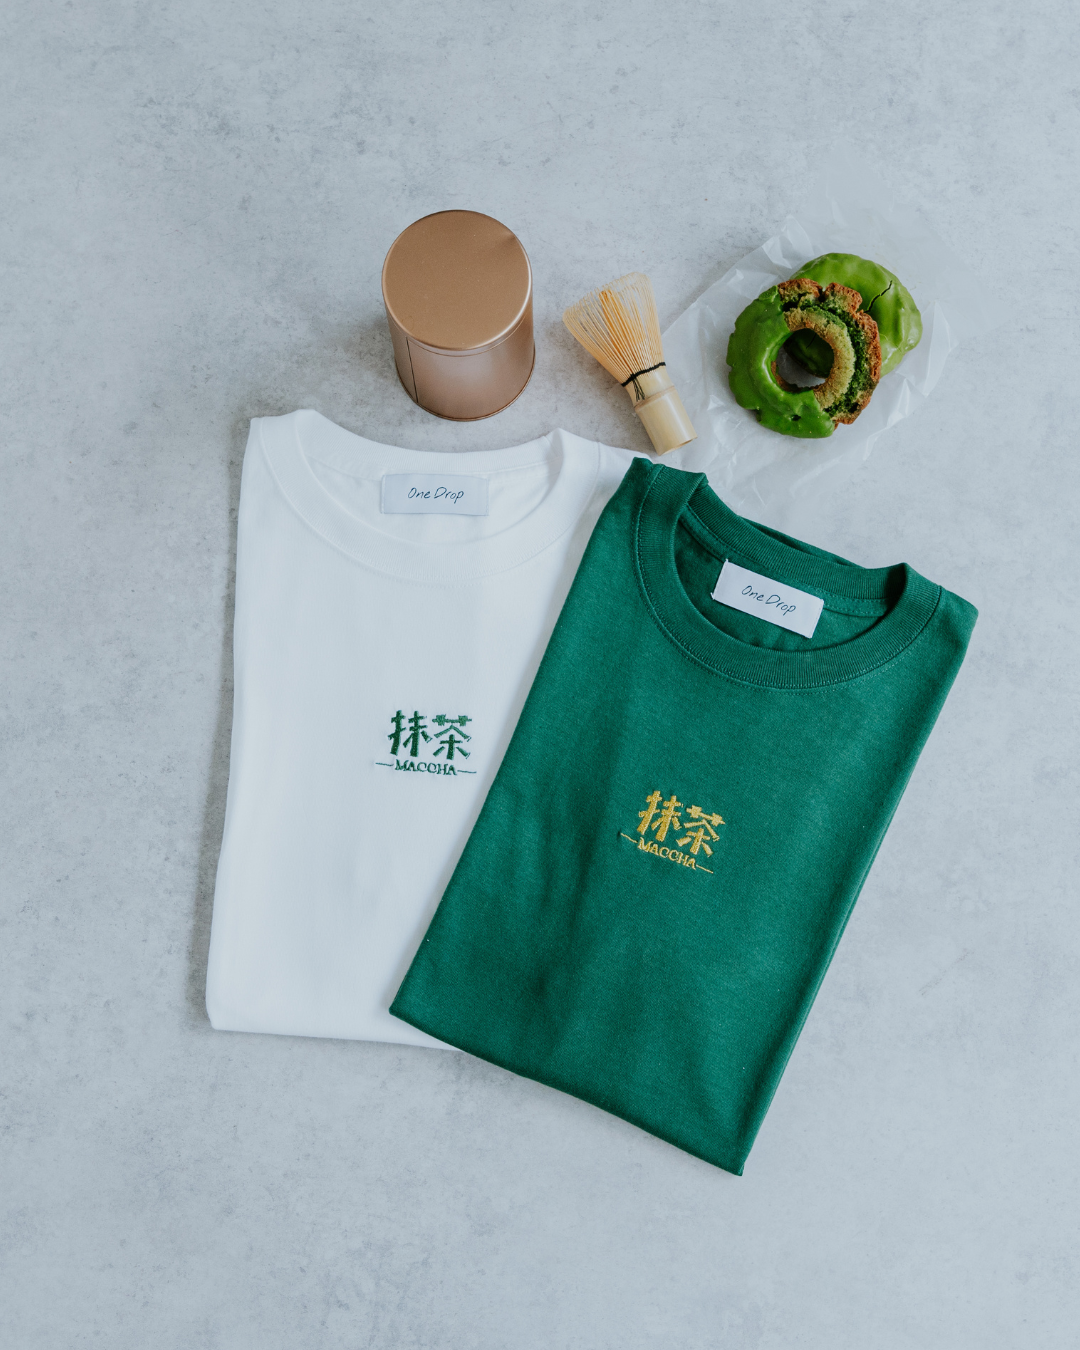 【RELEASE 7.6 10:00】ふくだ抹茶刺繍Tshirt